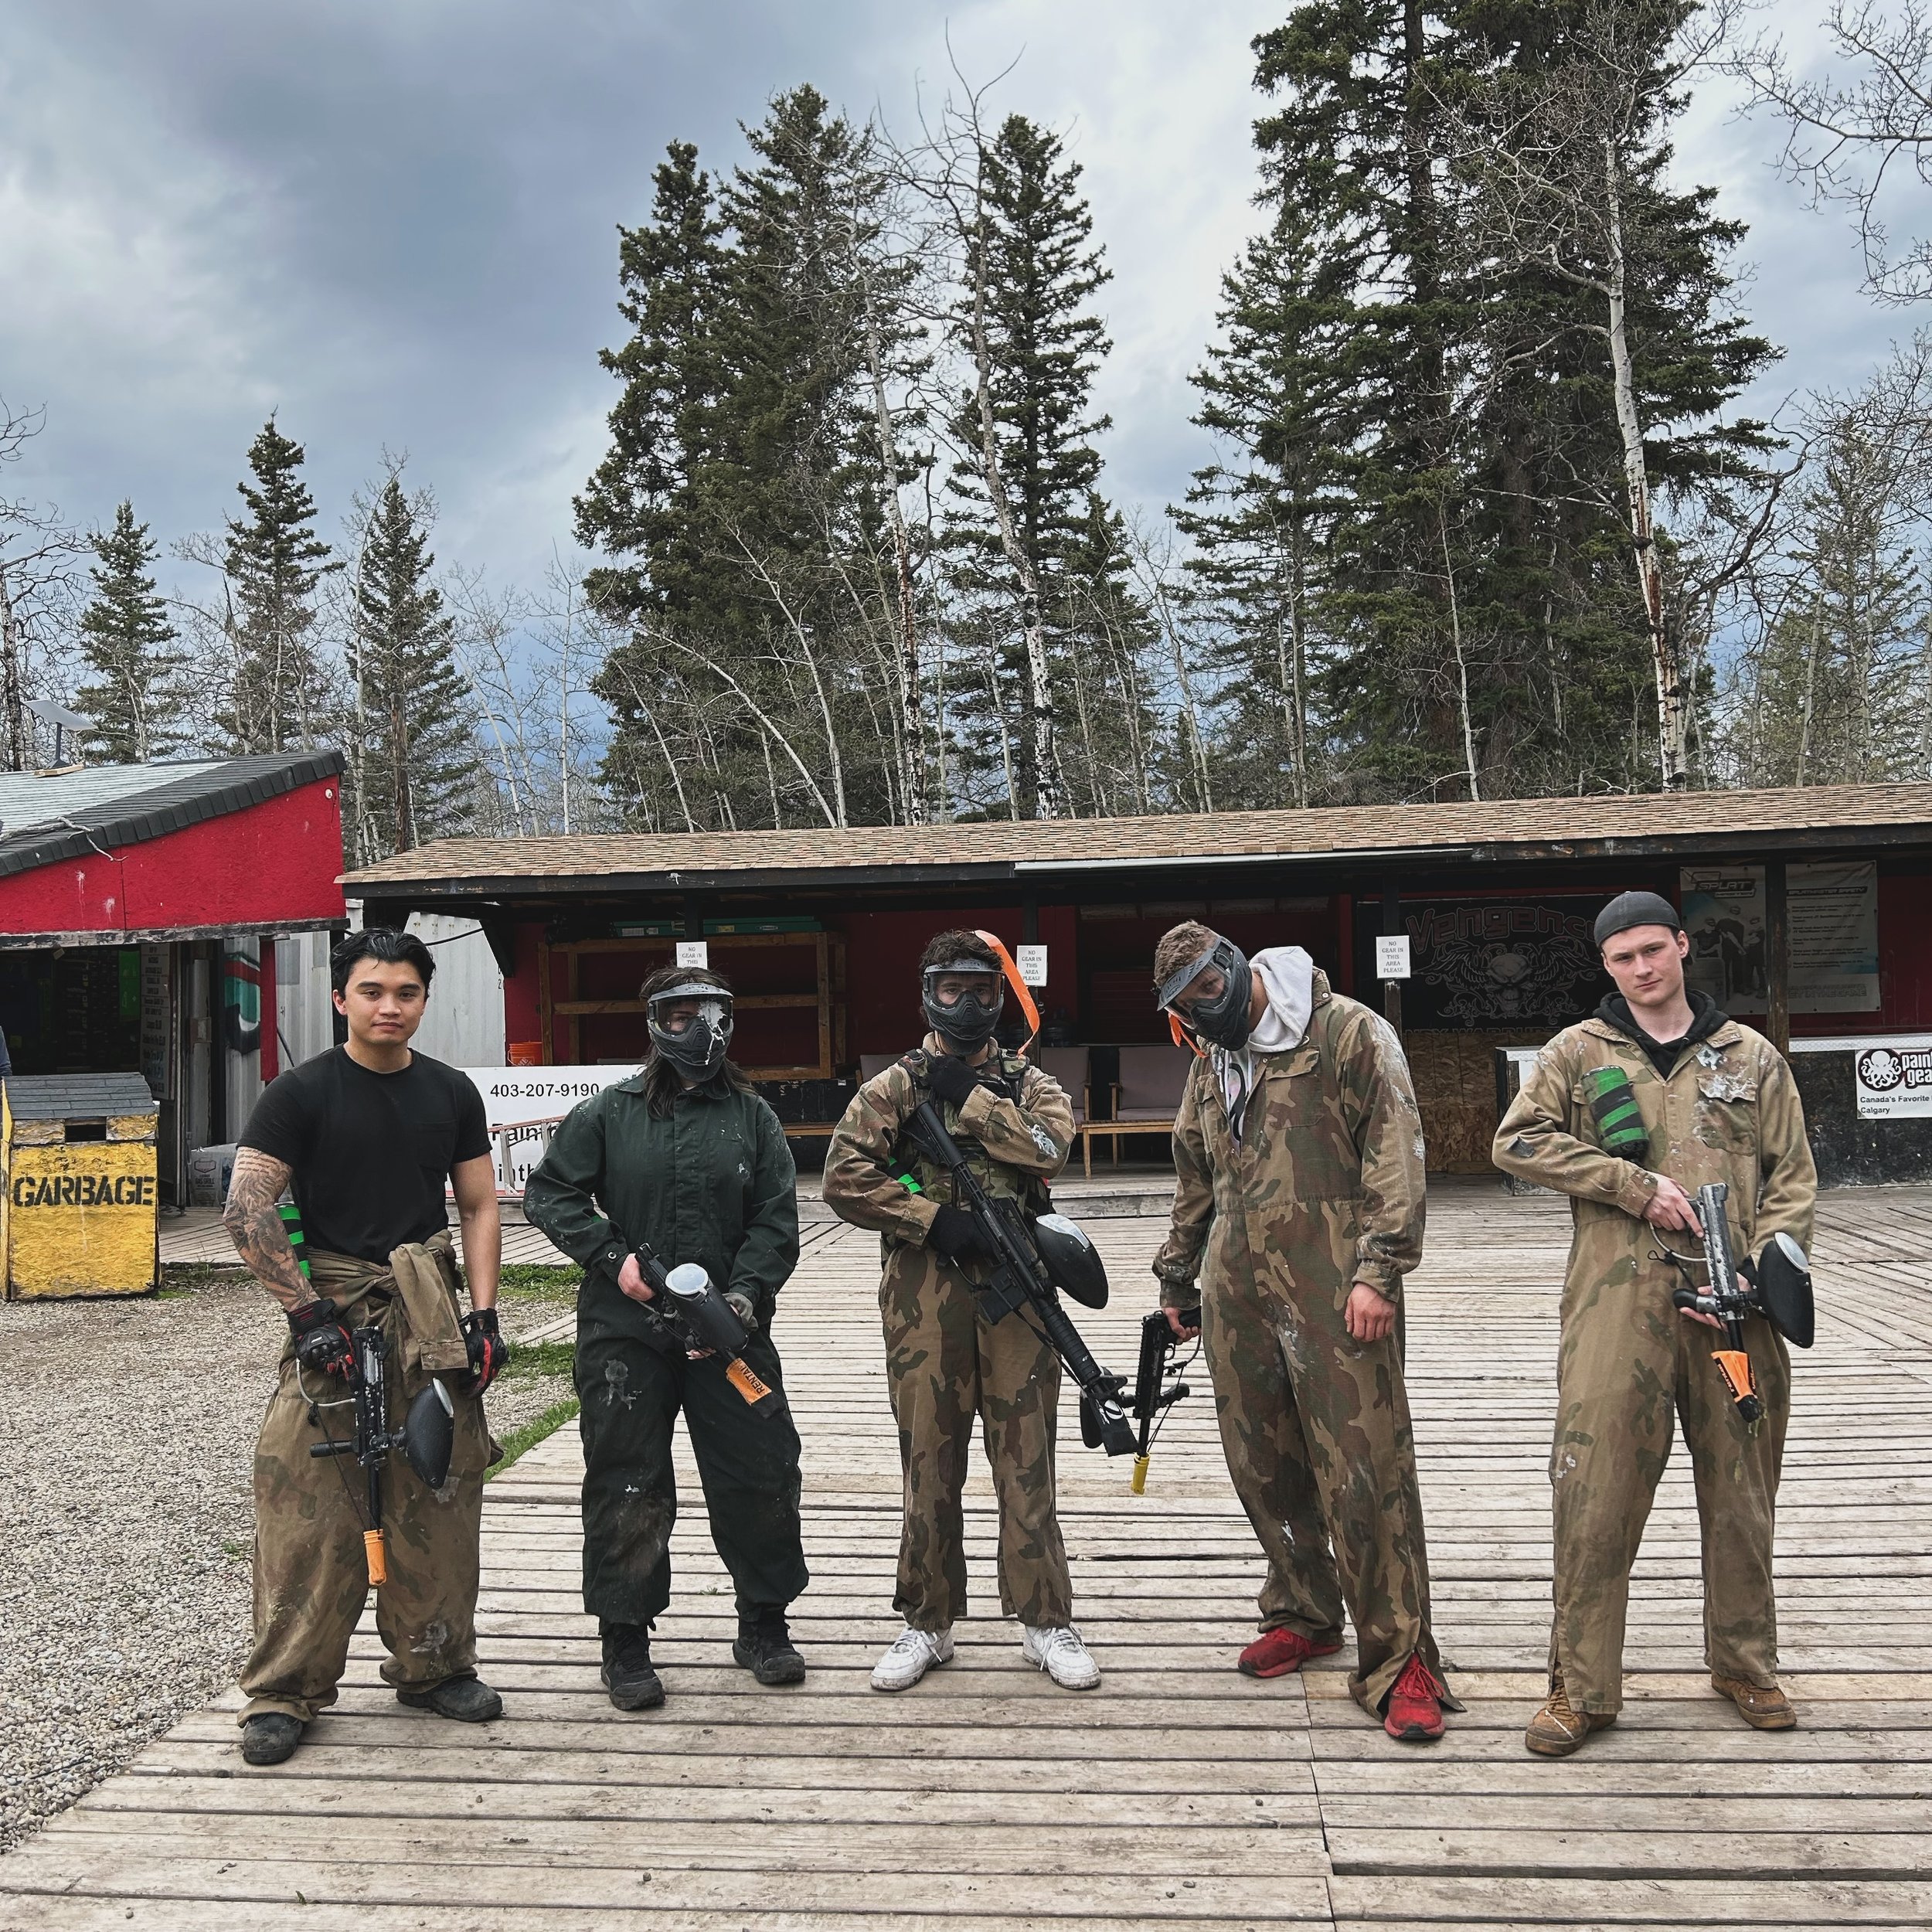 Got the day off and looking for something to do? We are open all day today 10am-6pm (last sign in time 4pm)! Come on out and enjoy the long weekend 
 
 
 

 

#braggcreek #yyc #calgary #alberta #canada #outdoors #extremesports #paintball  #growpaintb